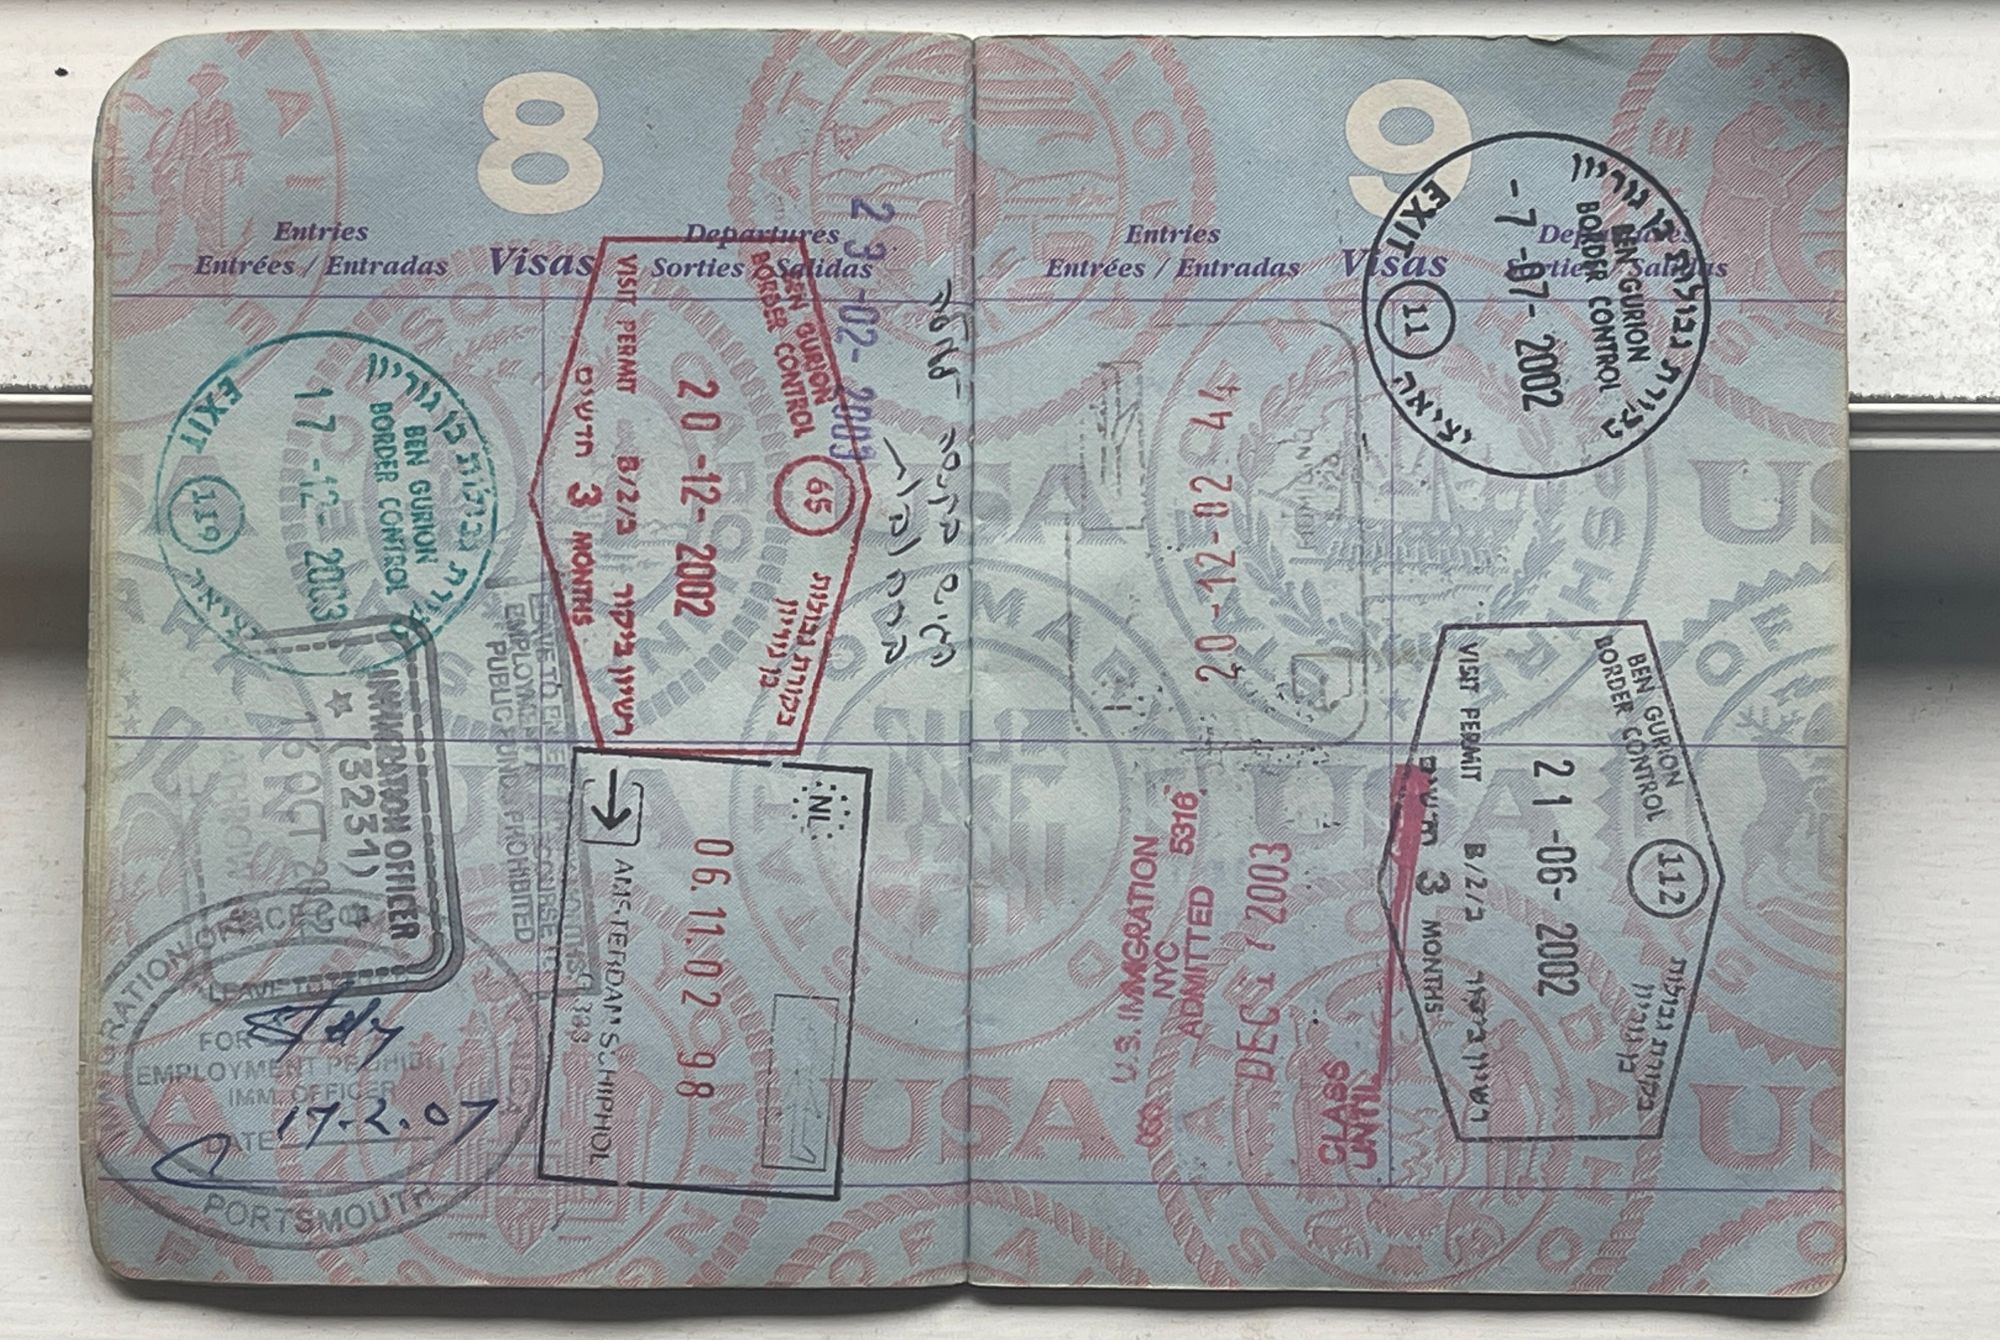 Pages shown featuring entry and exit stamps from my first passport.